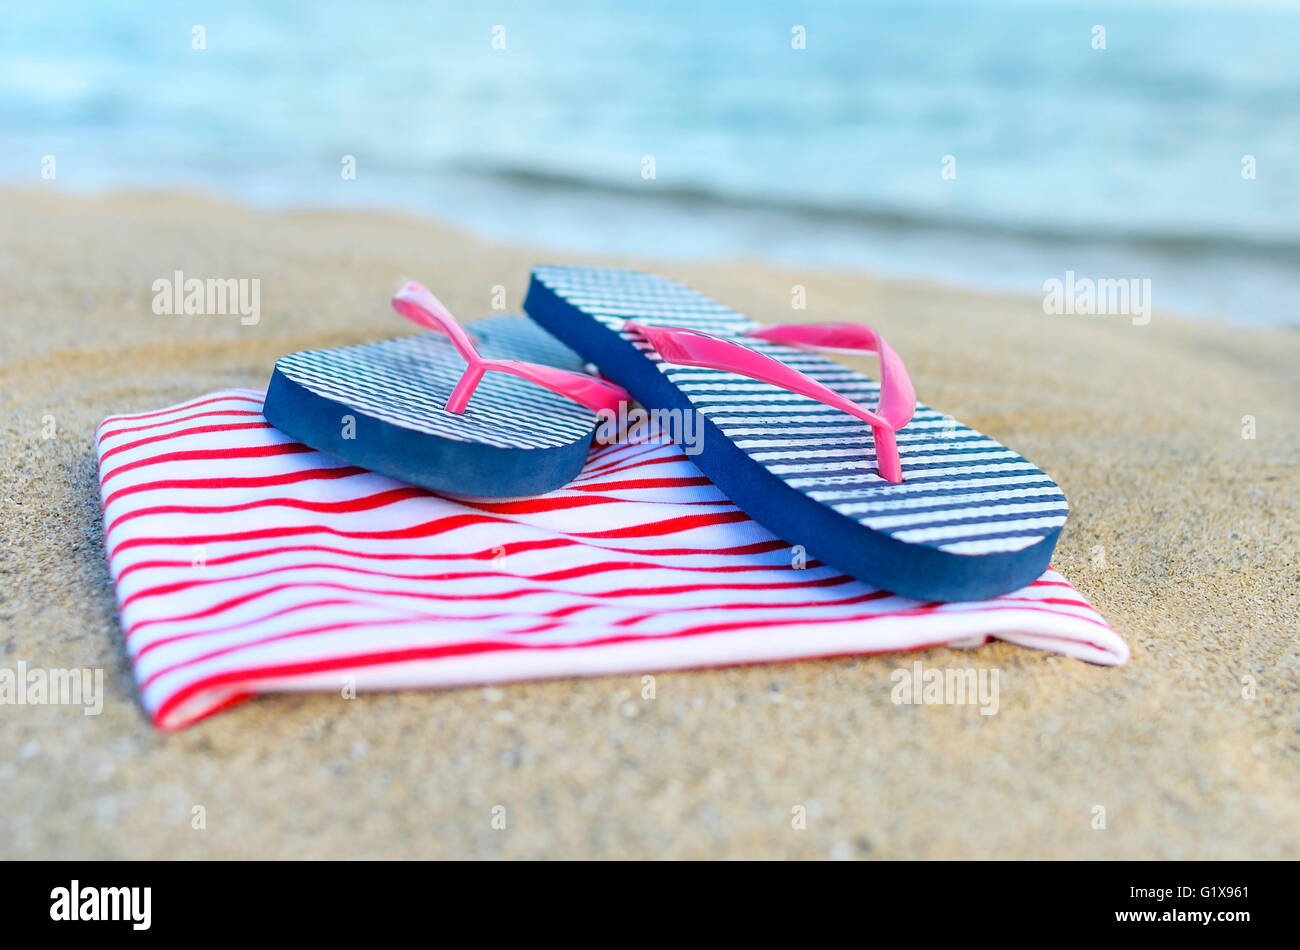 Things are scattered on the sea beach. Focus on glasses. Stock Photo